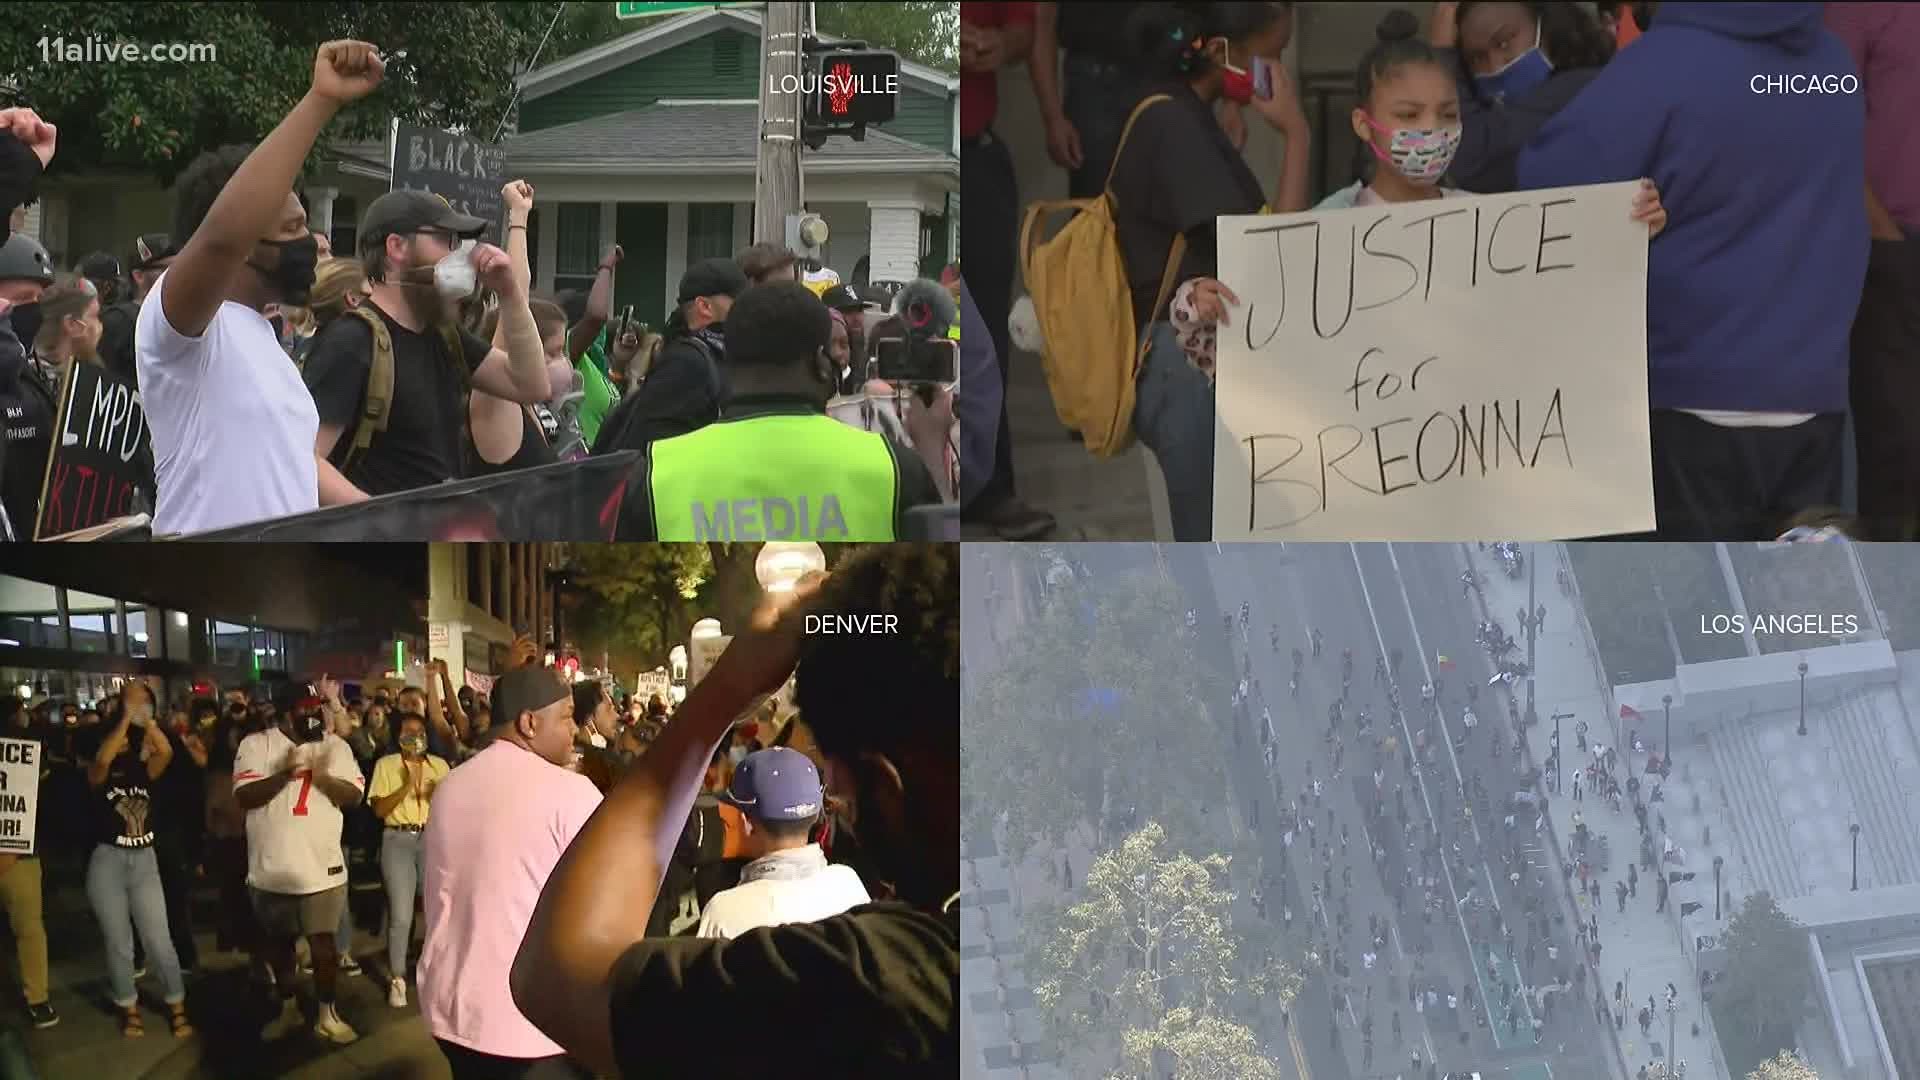 One person told 11Alive that they are tired of continuously having to have this conversation regarding justice.